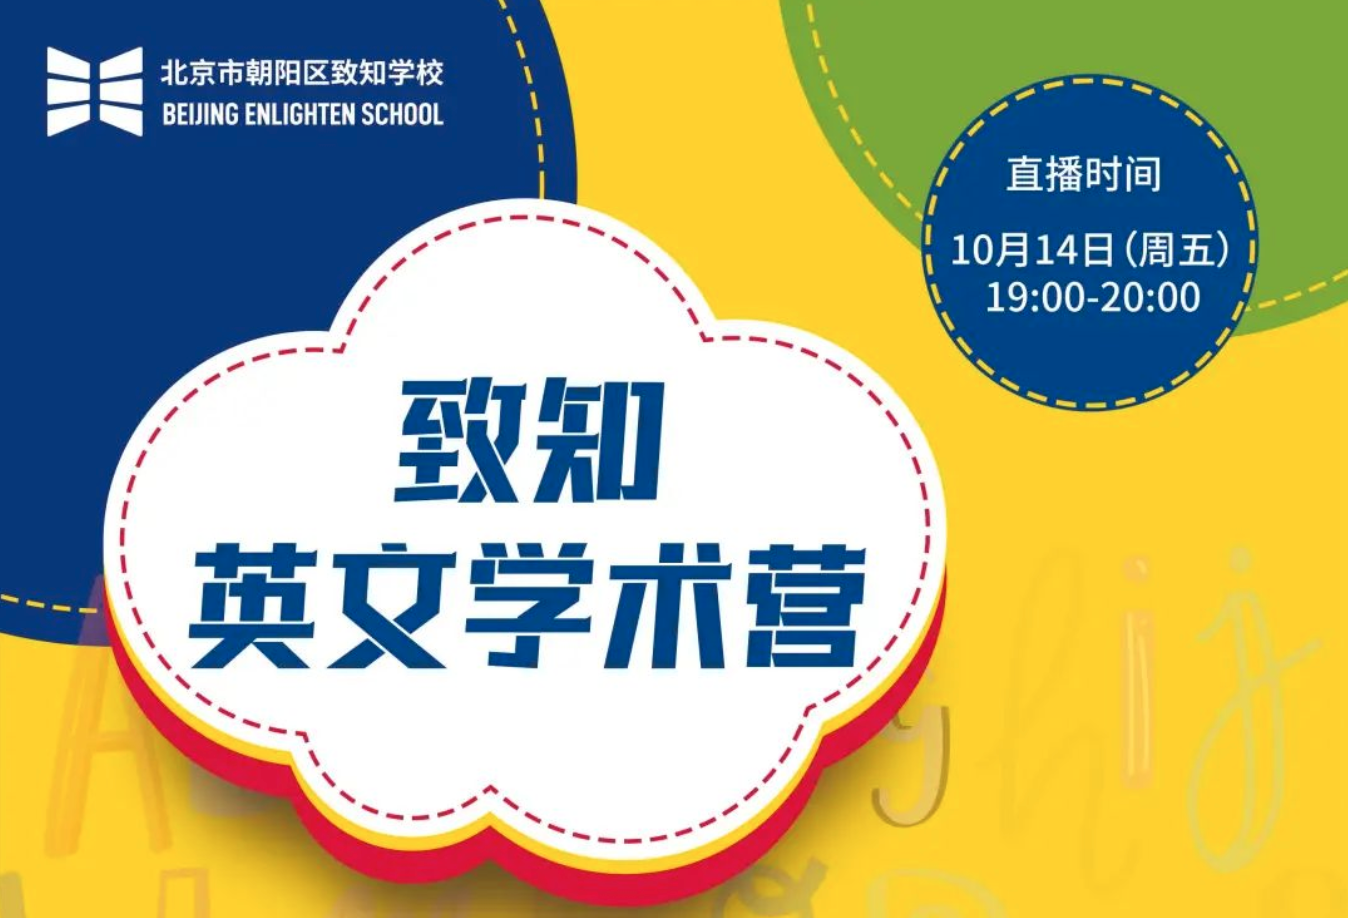 Live broadcast preview: break through academic English barriers and cultivate English communication and expression直播预告：突破学术英文壁垒，培养英文沟通表达力